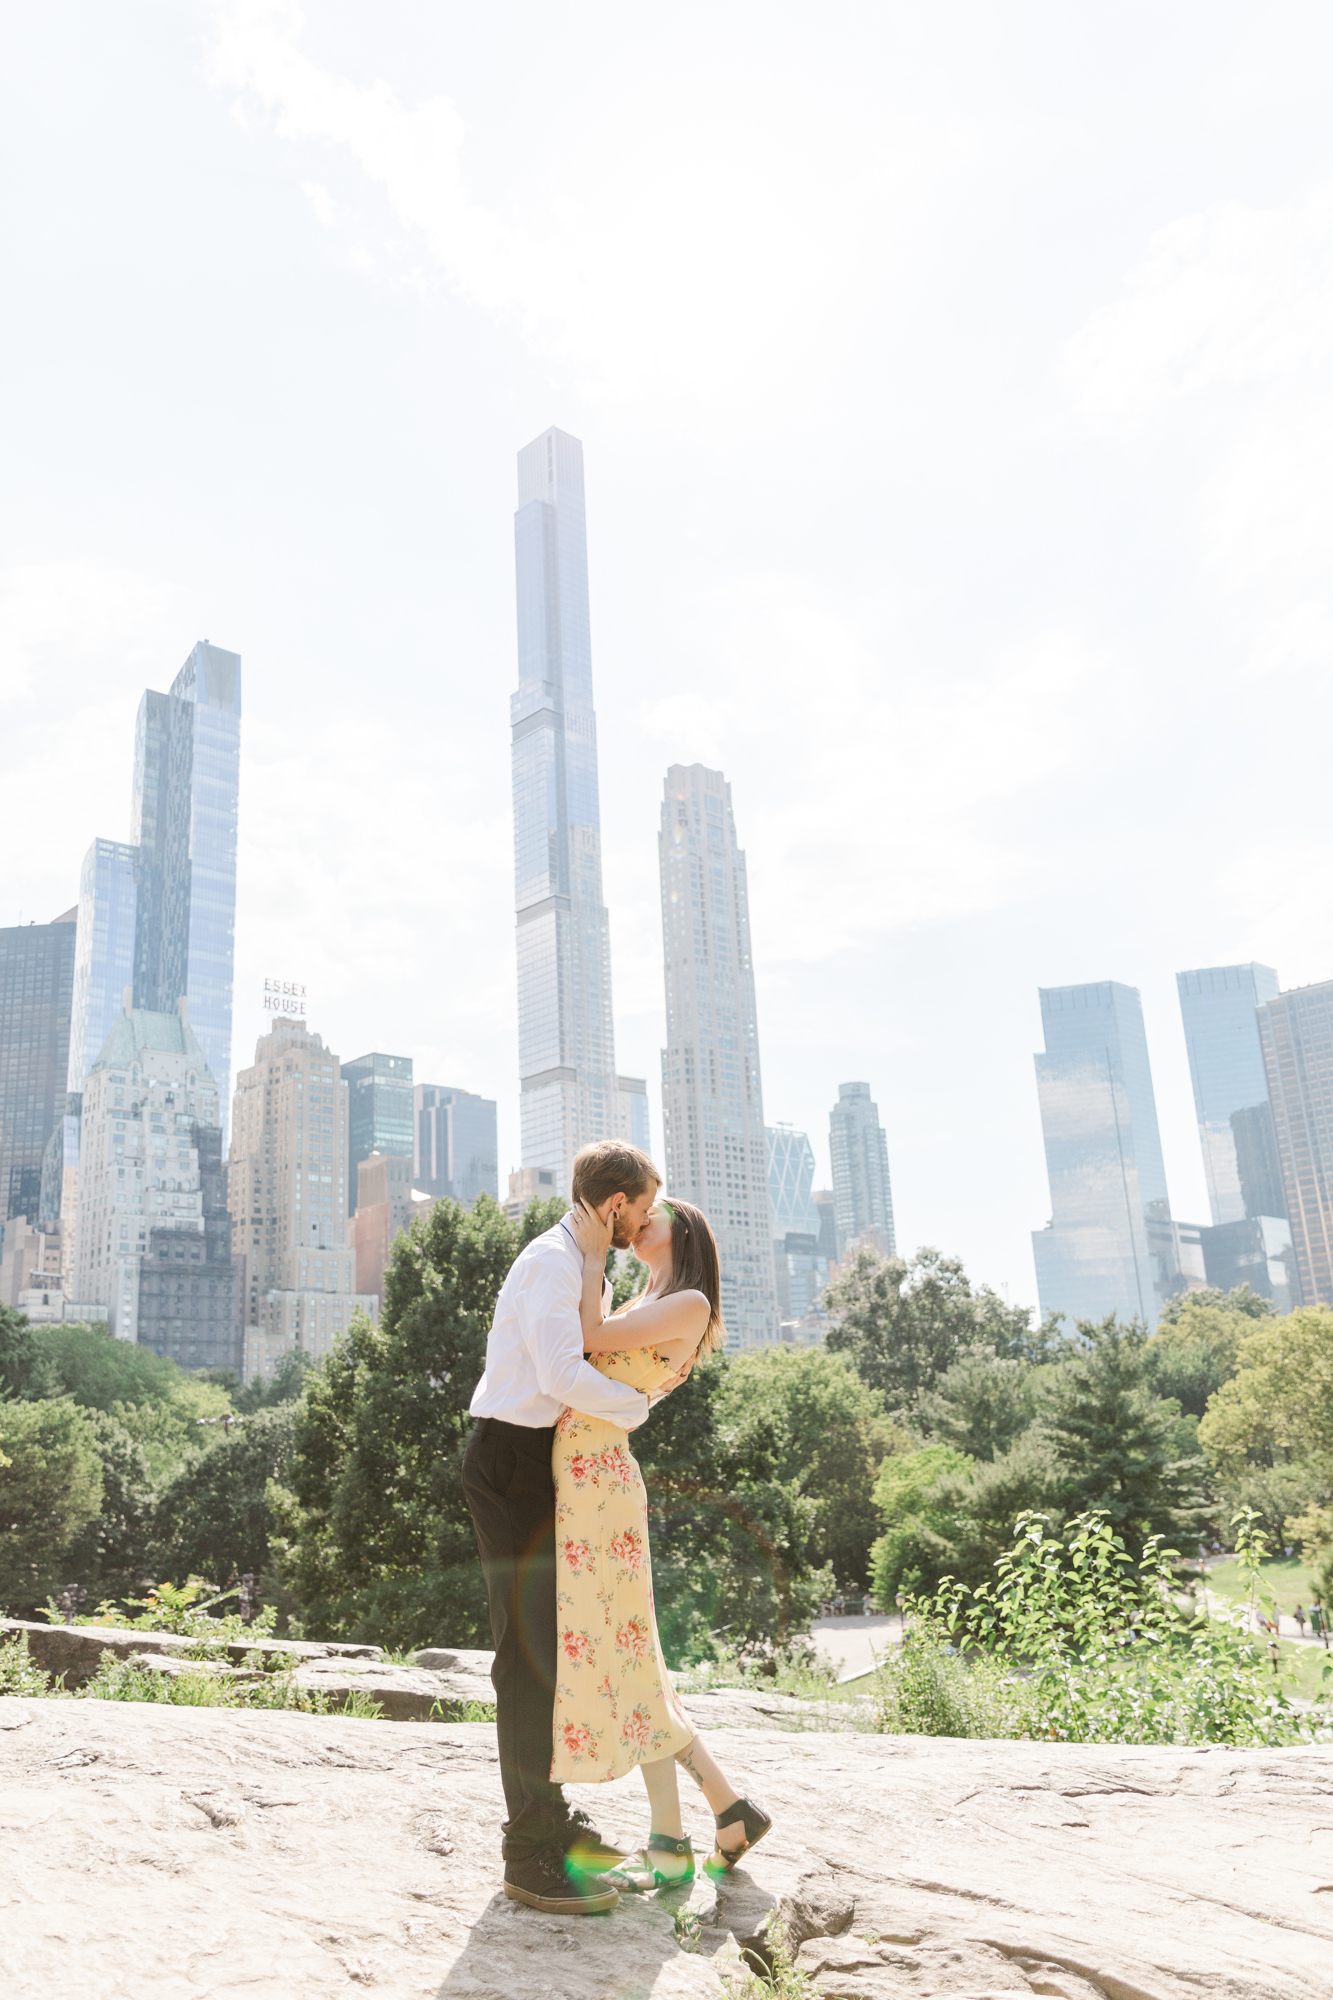 Special Central Park Elopement in the Summertime